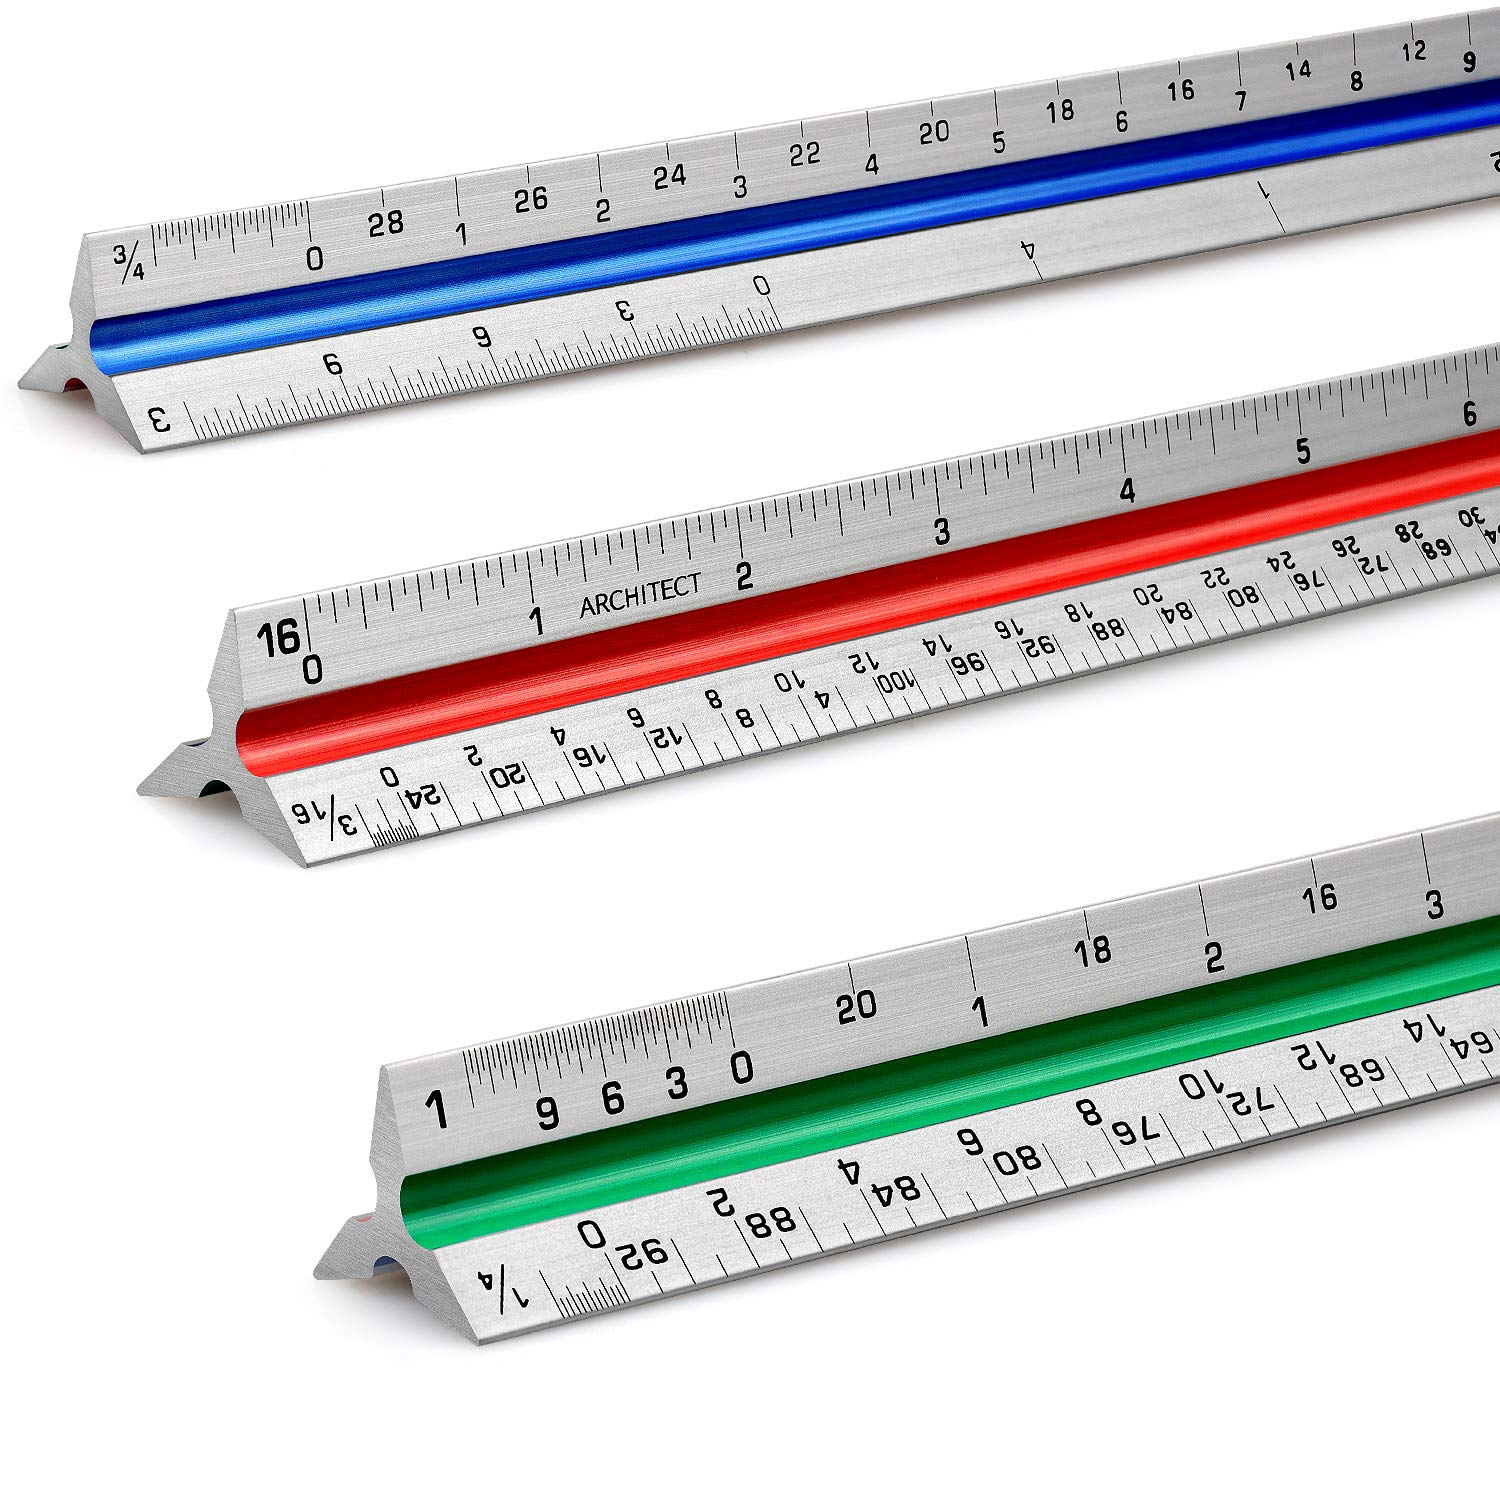 Hutou 12 Architectural Scale Ruler Aluminum Architect Scale Triangular Scale Ruler For Architects, Draftsman, Students And Engineers,